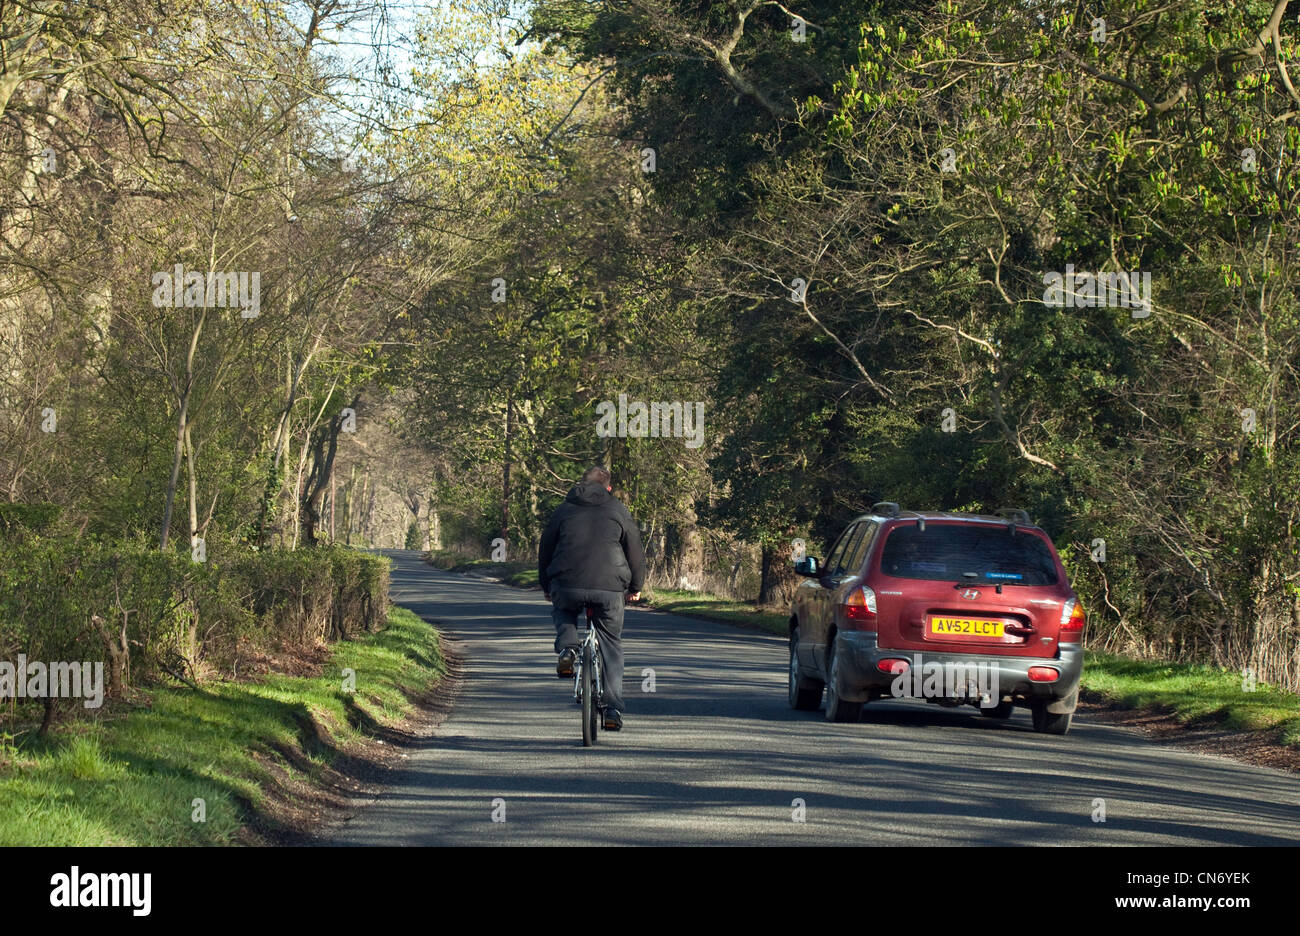 A car overtaking a cyclist riding a bicycle on a country road in Cambridgeshire East anglia UK Stock Photo